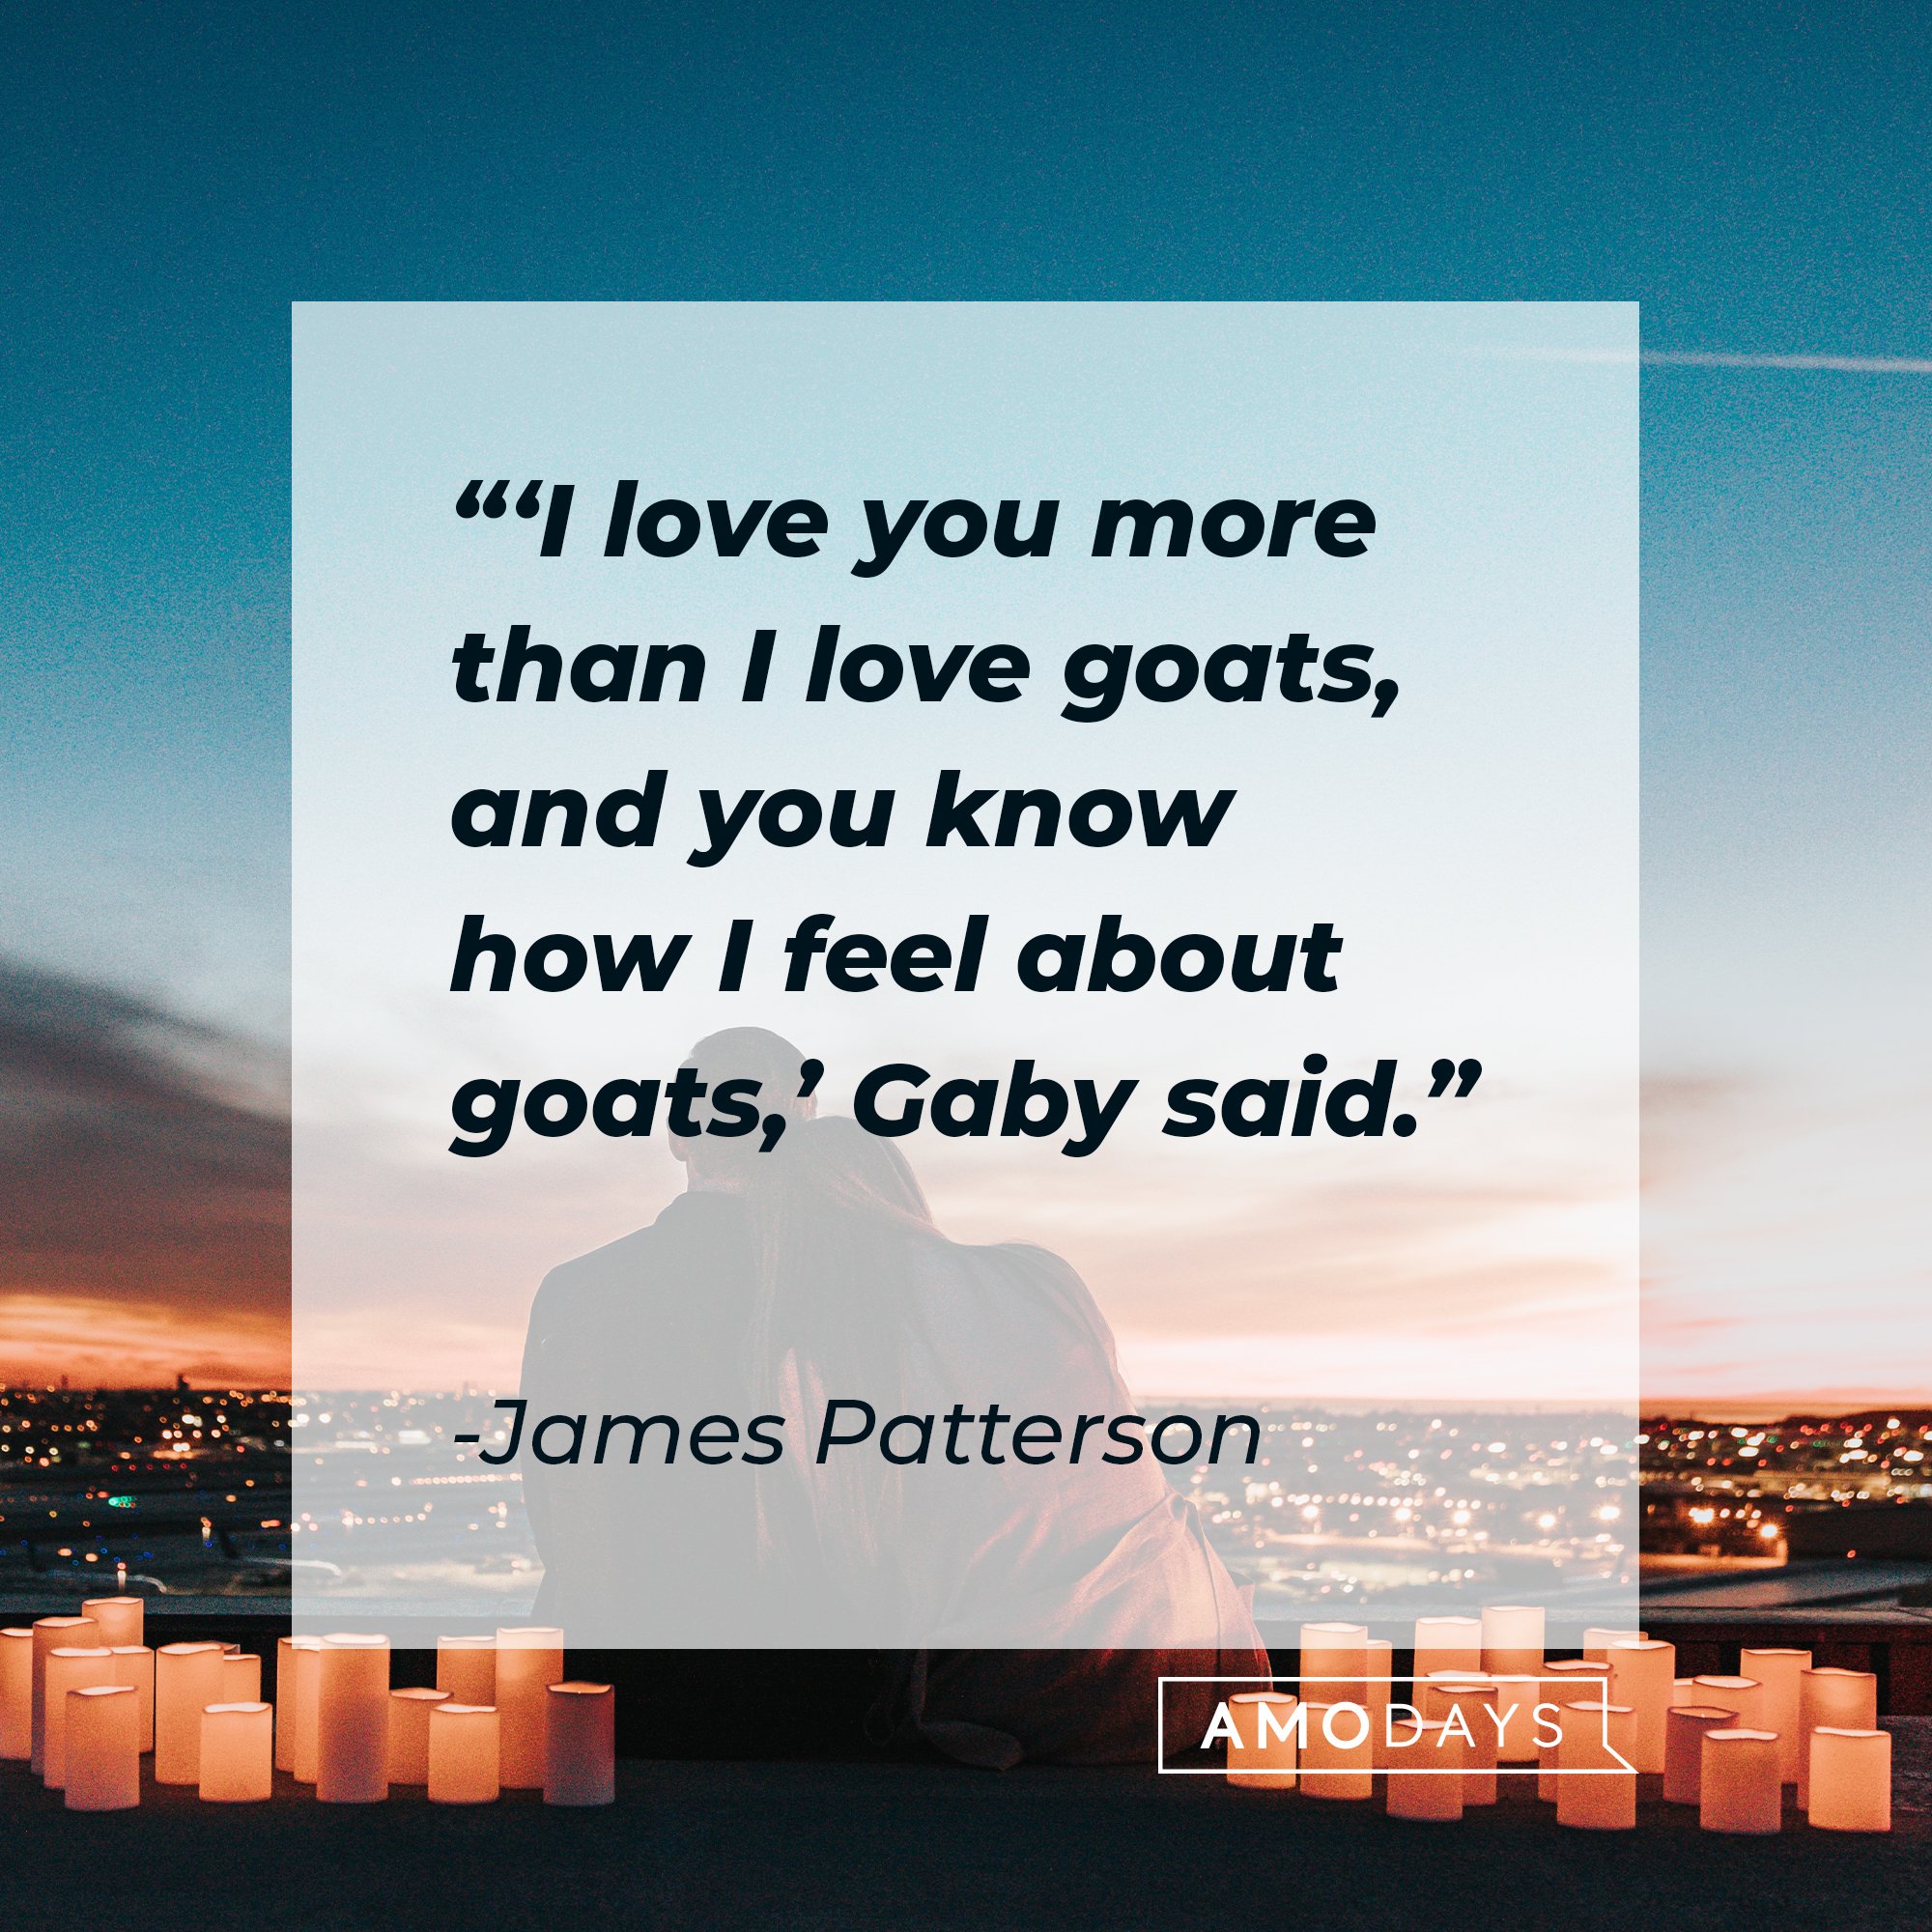 James Patterson’s quote: "'I love you more than I love goats, and you know how I feel about goats,' Gaby said." | Image: AmoDays 